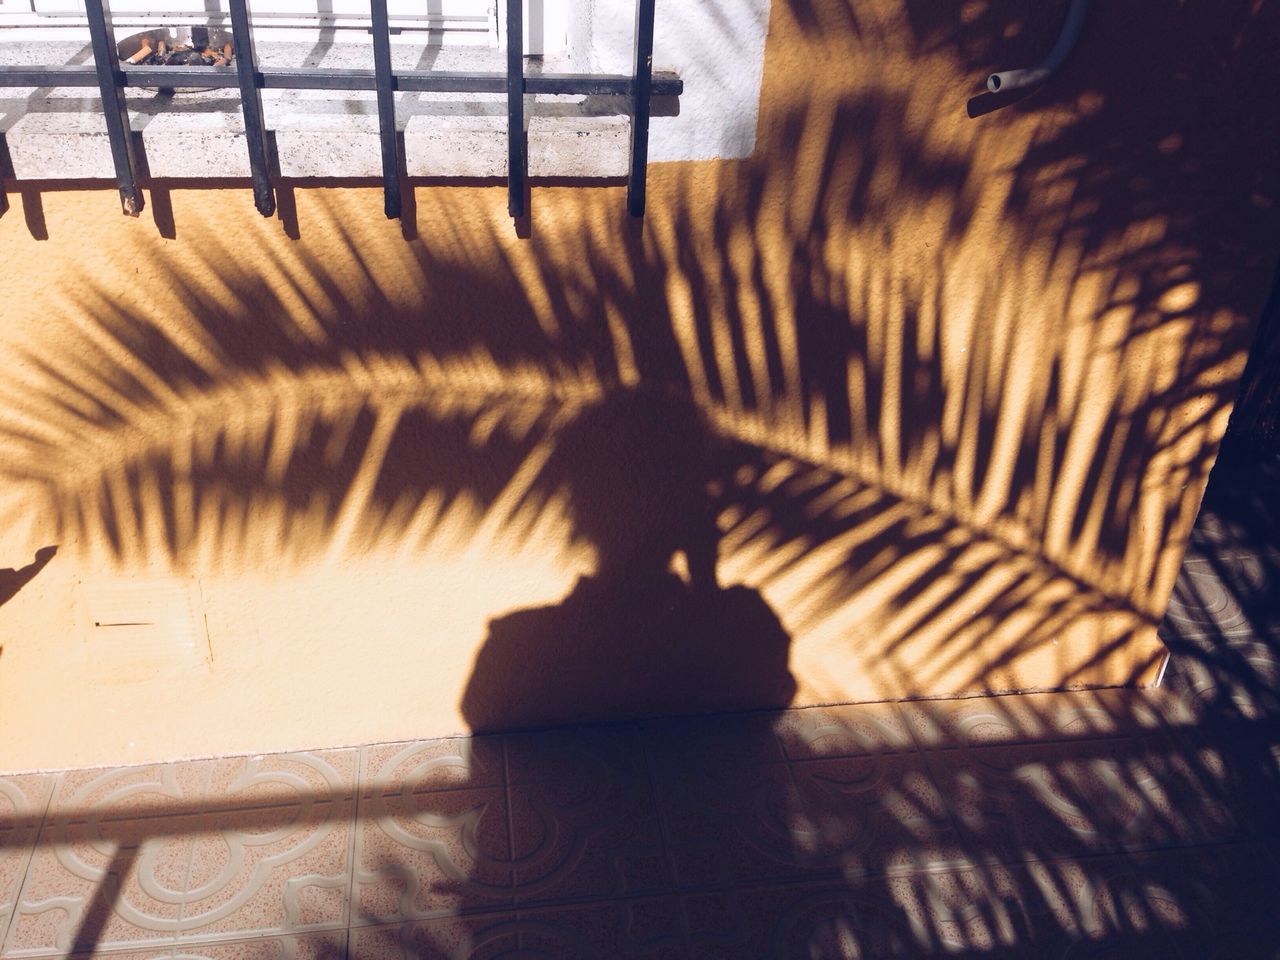 shadow, silhouette, sunlight, indoors, water, high angle view, reflection, sitting, relaxation, railing, full length, standing, focus on shadow, rear view, lifestyles, men, walking, unrecognizable person